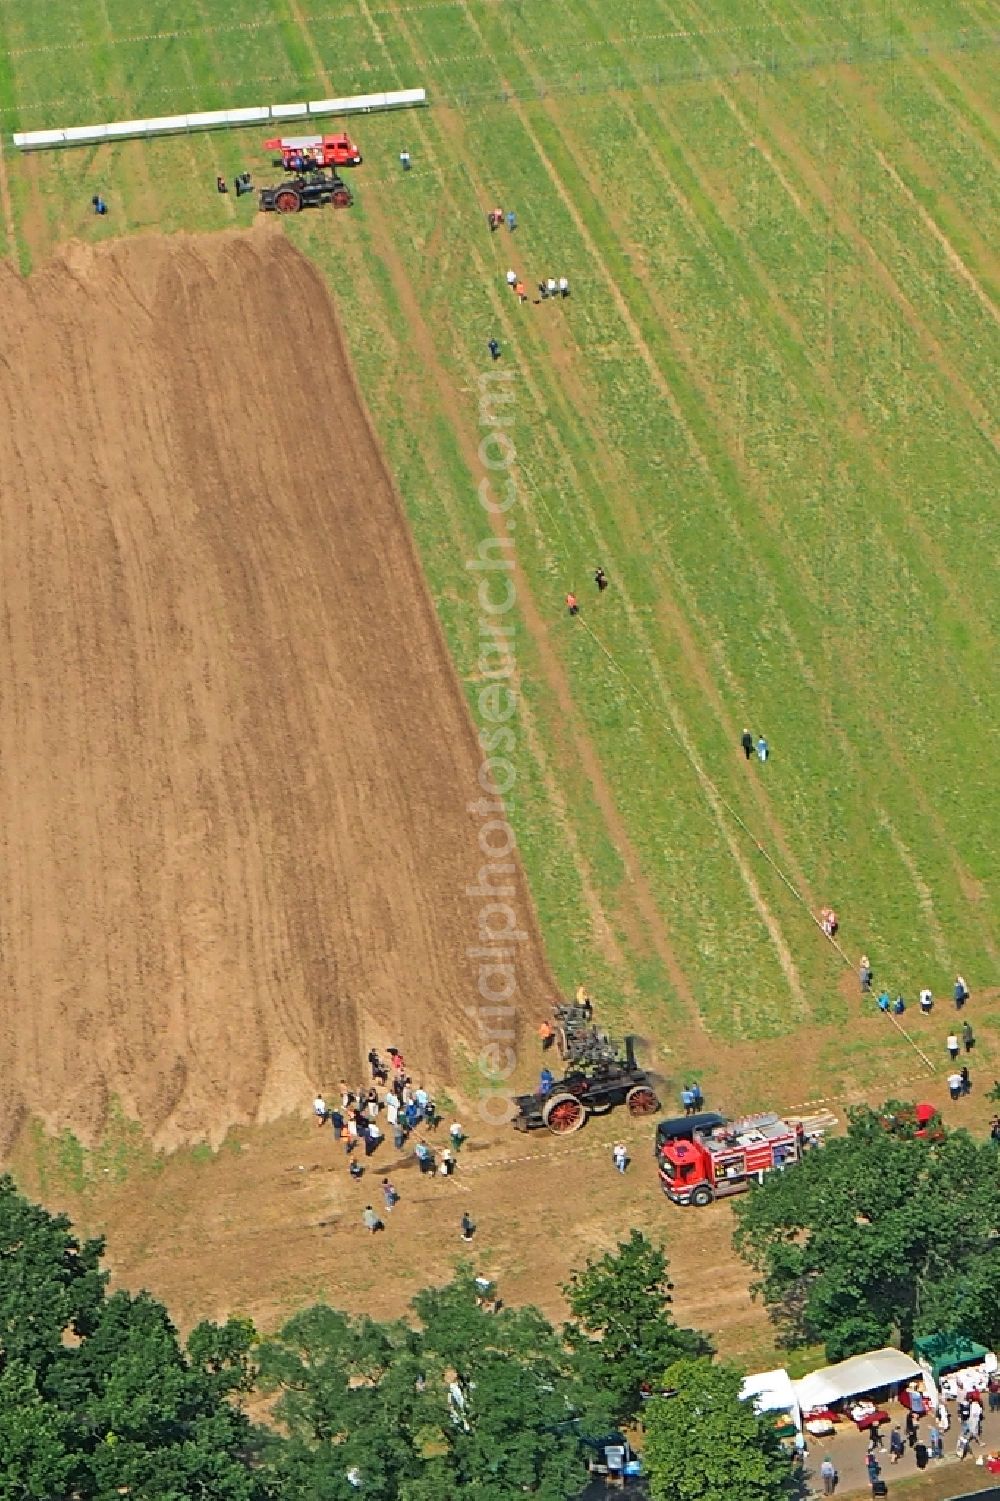 Aerial image Friedersdorf - Participants at the event area 5.FRIEDERSDORFER DAMPFPFLUeGEN On fields and arable land in Friedersdorf in the state Brandenburg, Germany